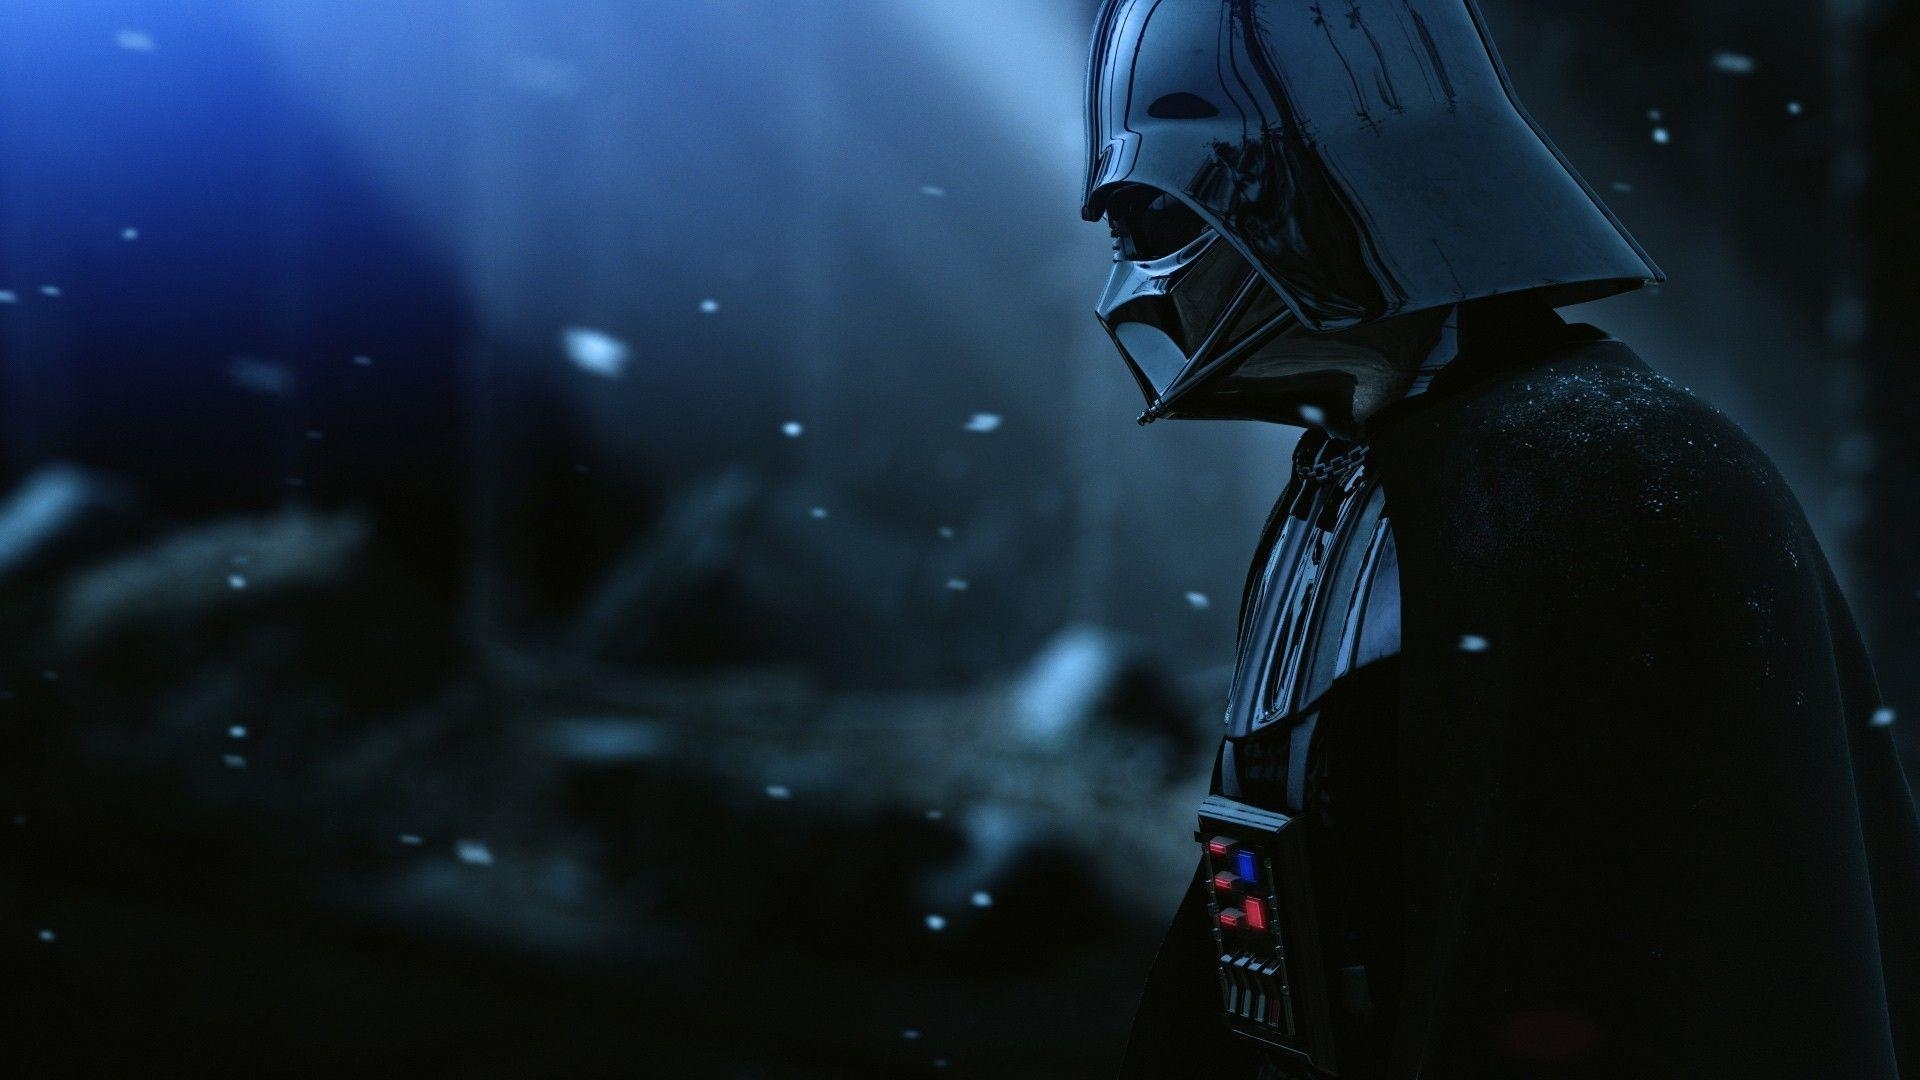 10 Latest Star Wars Wallpaper Pc FULL HD 1920×1080 For PC Background